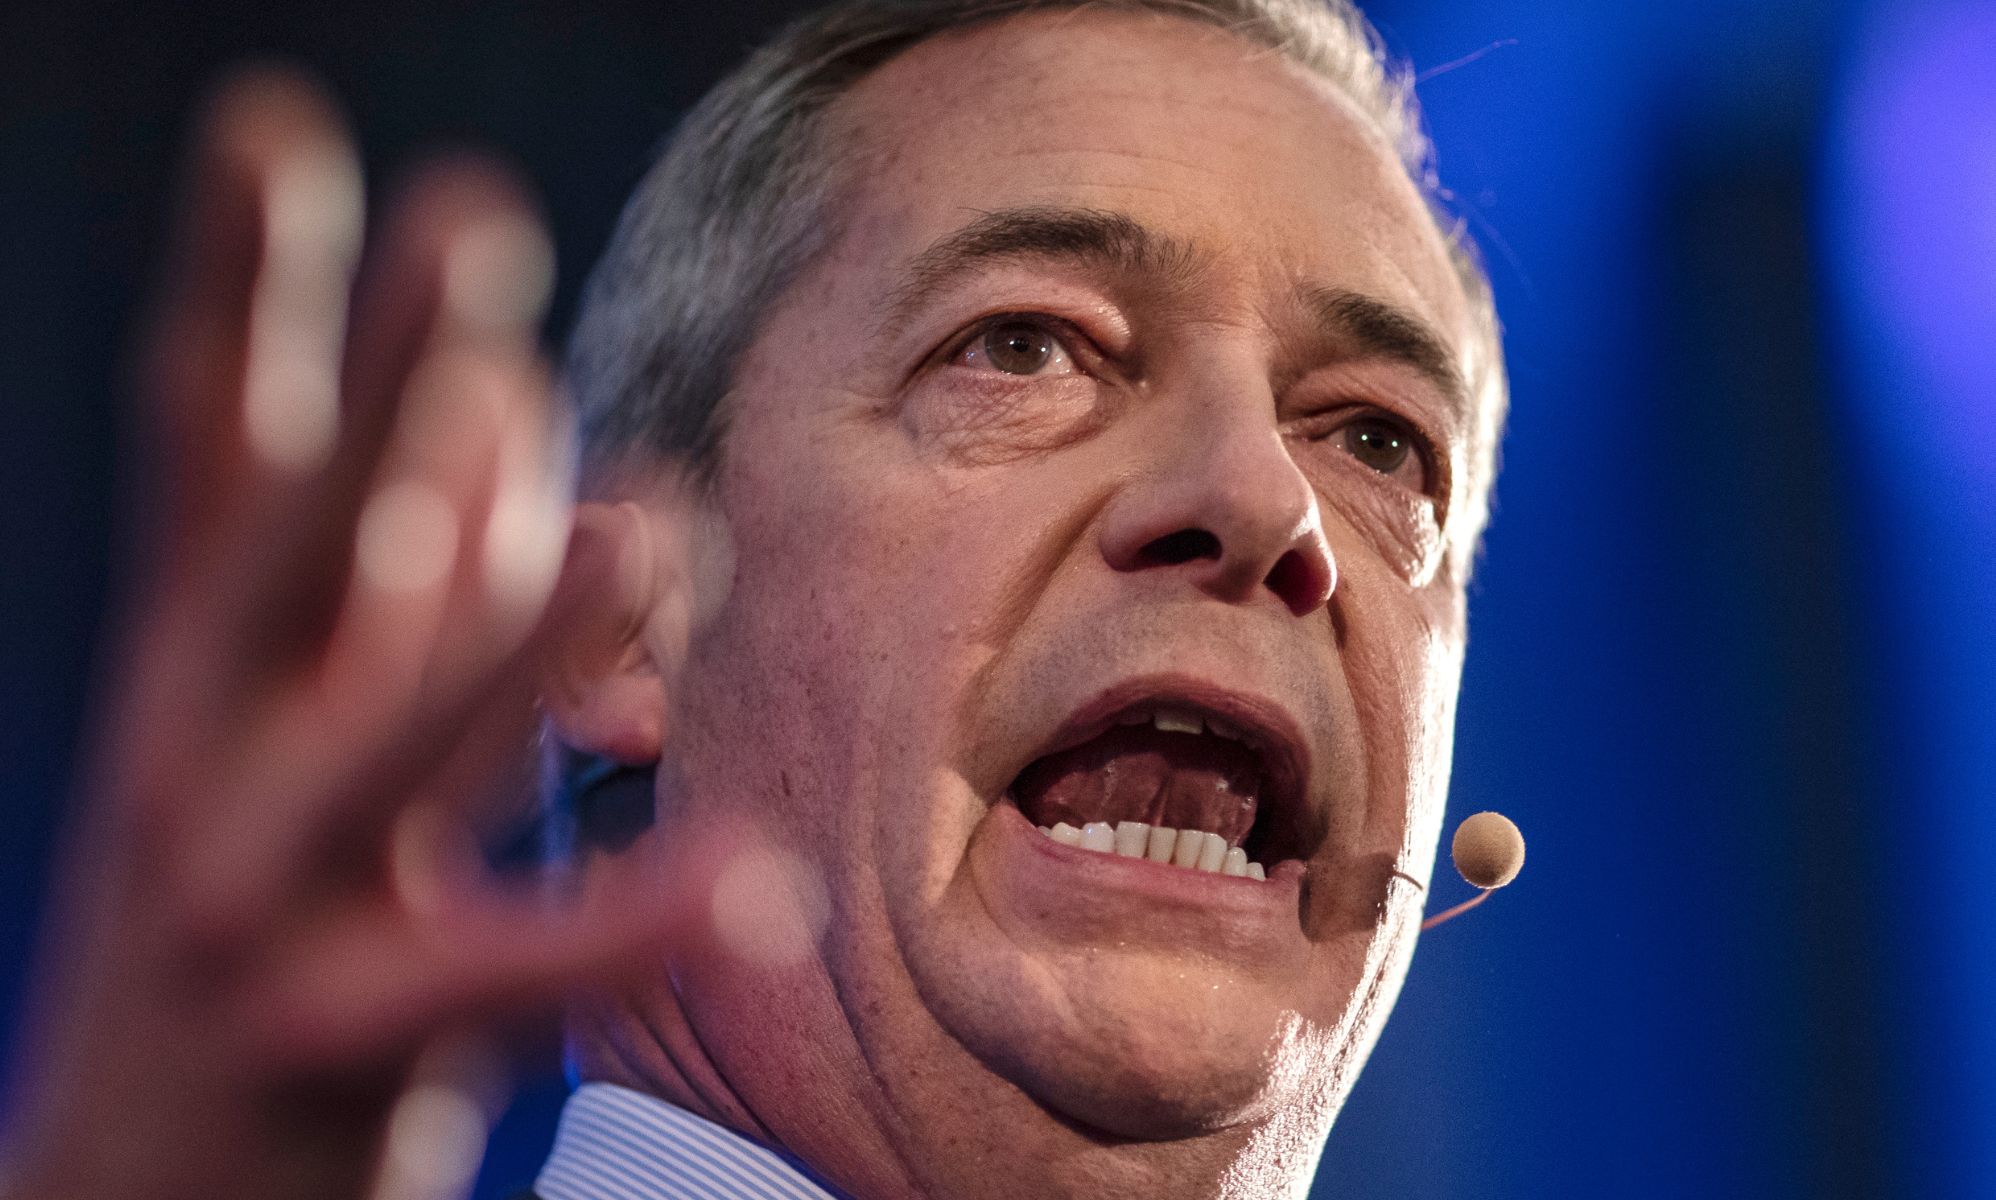 British individuals hate Nigel Farage, and the numbers show it ...